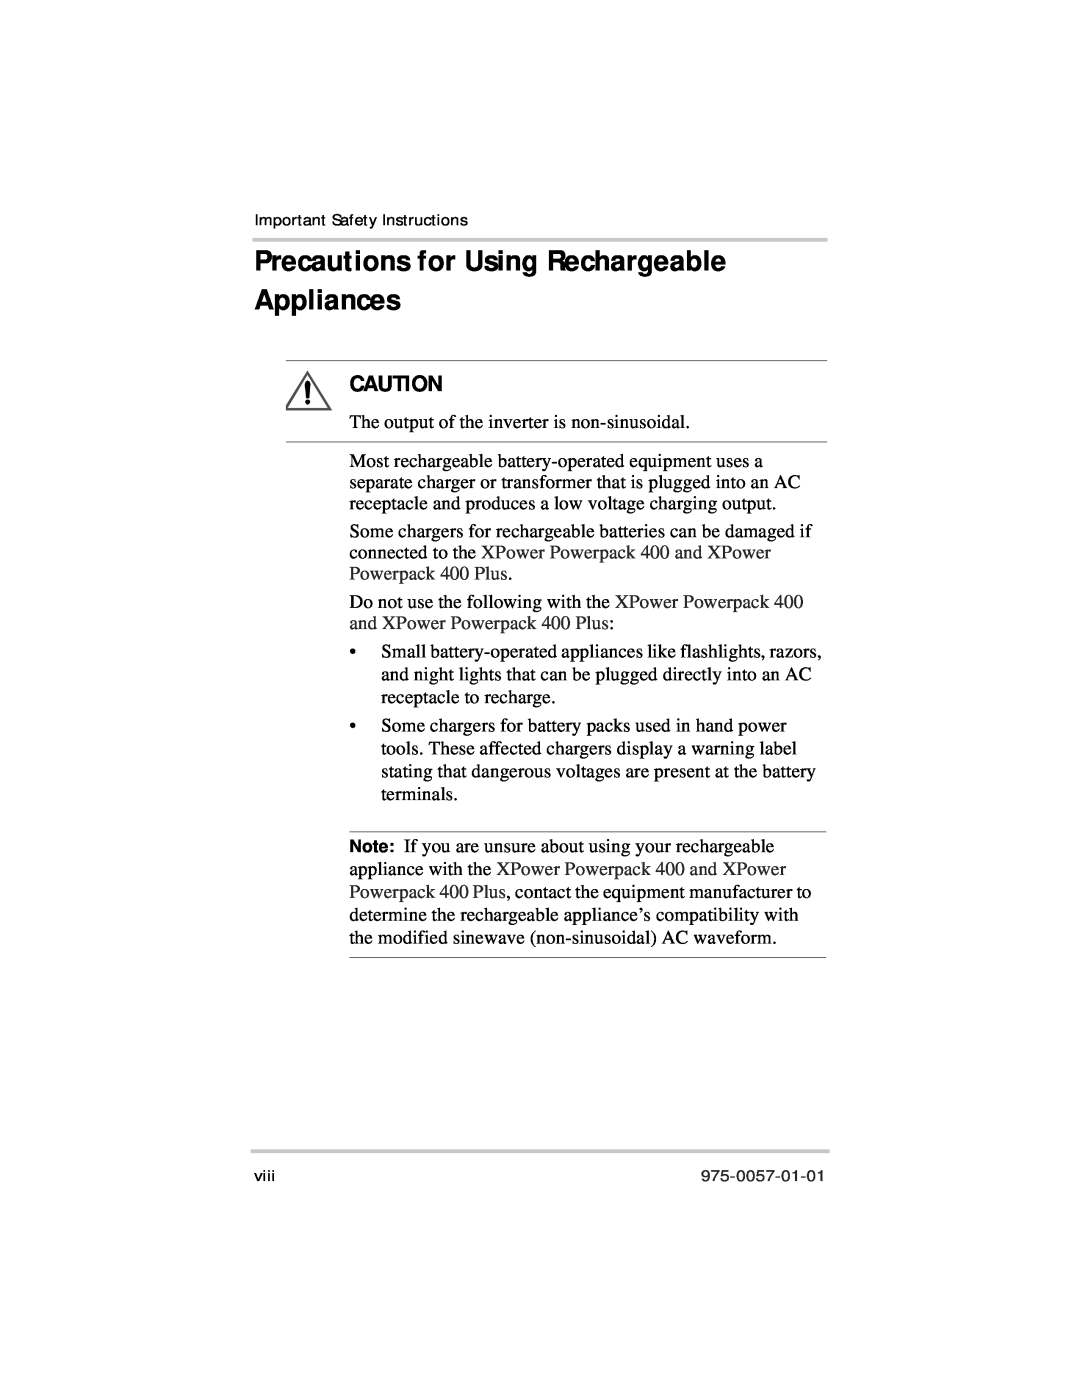 Xantrex Technology 975-0057-01-01 warranty Precautions for Using Rechargeable Appliances 